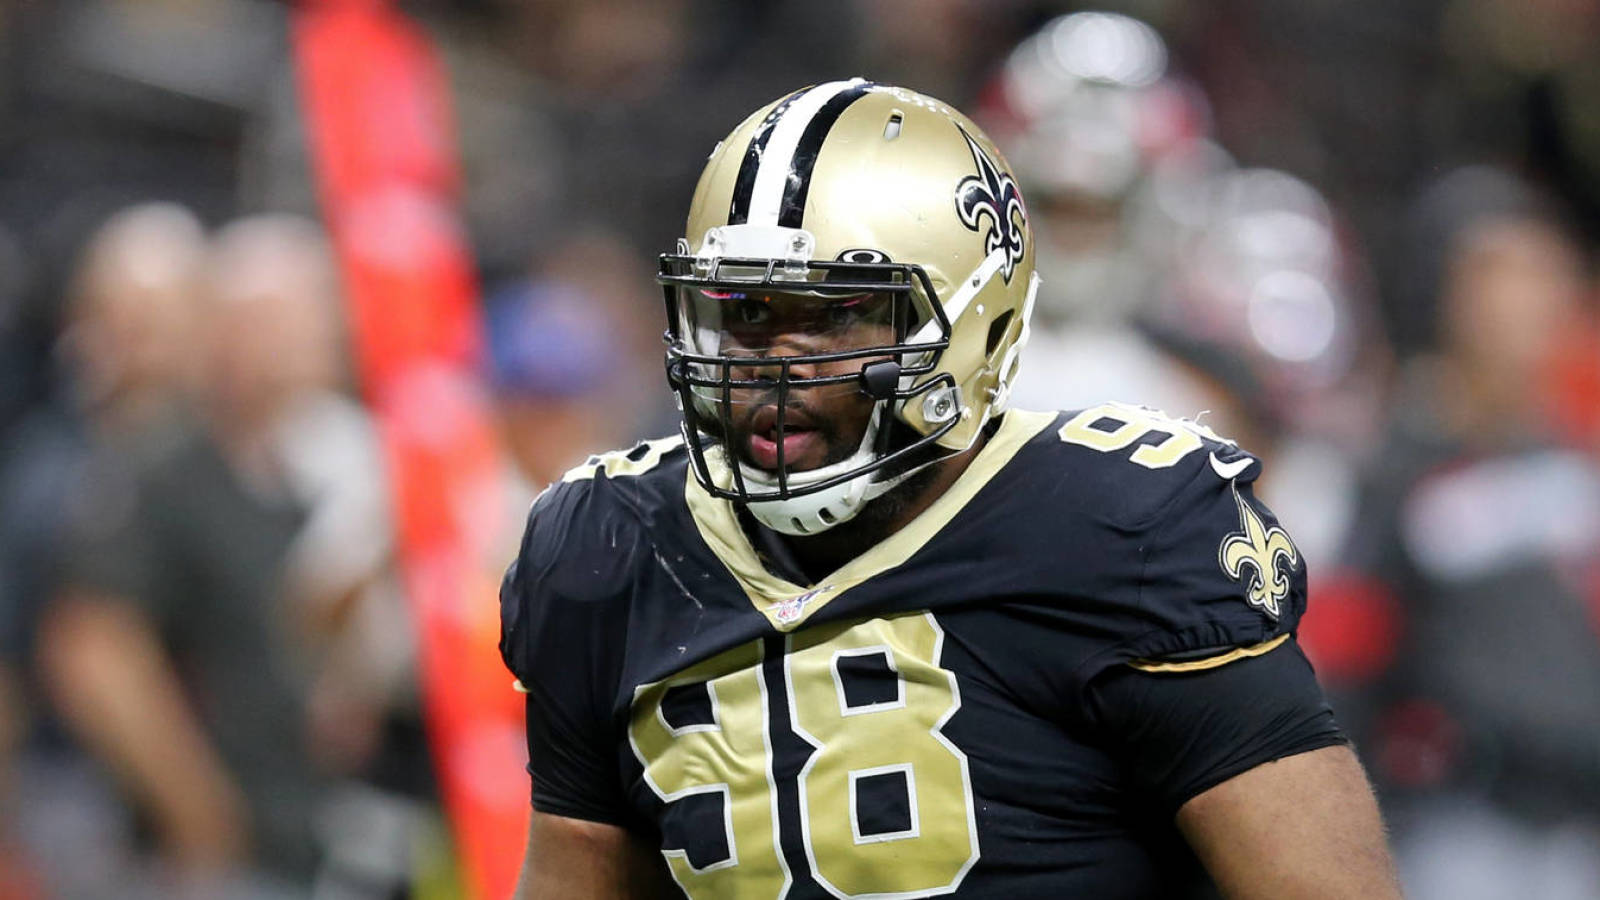 Veteran DT Sheldon Rankins, Jets agrees to a $ 17 million two-year contract